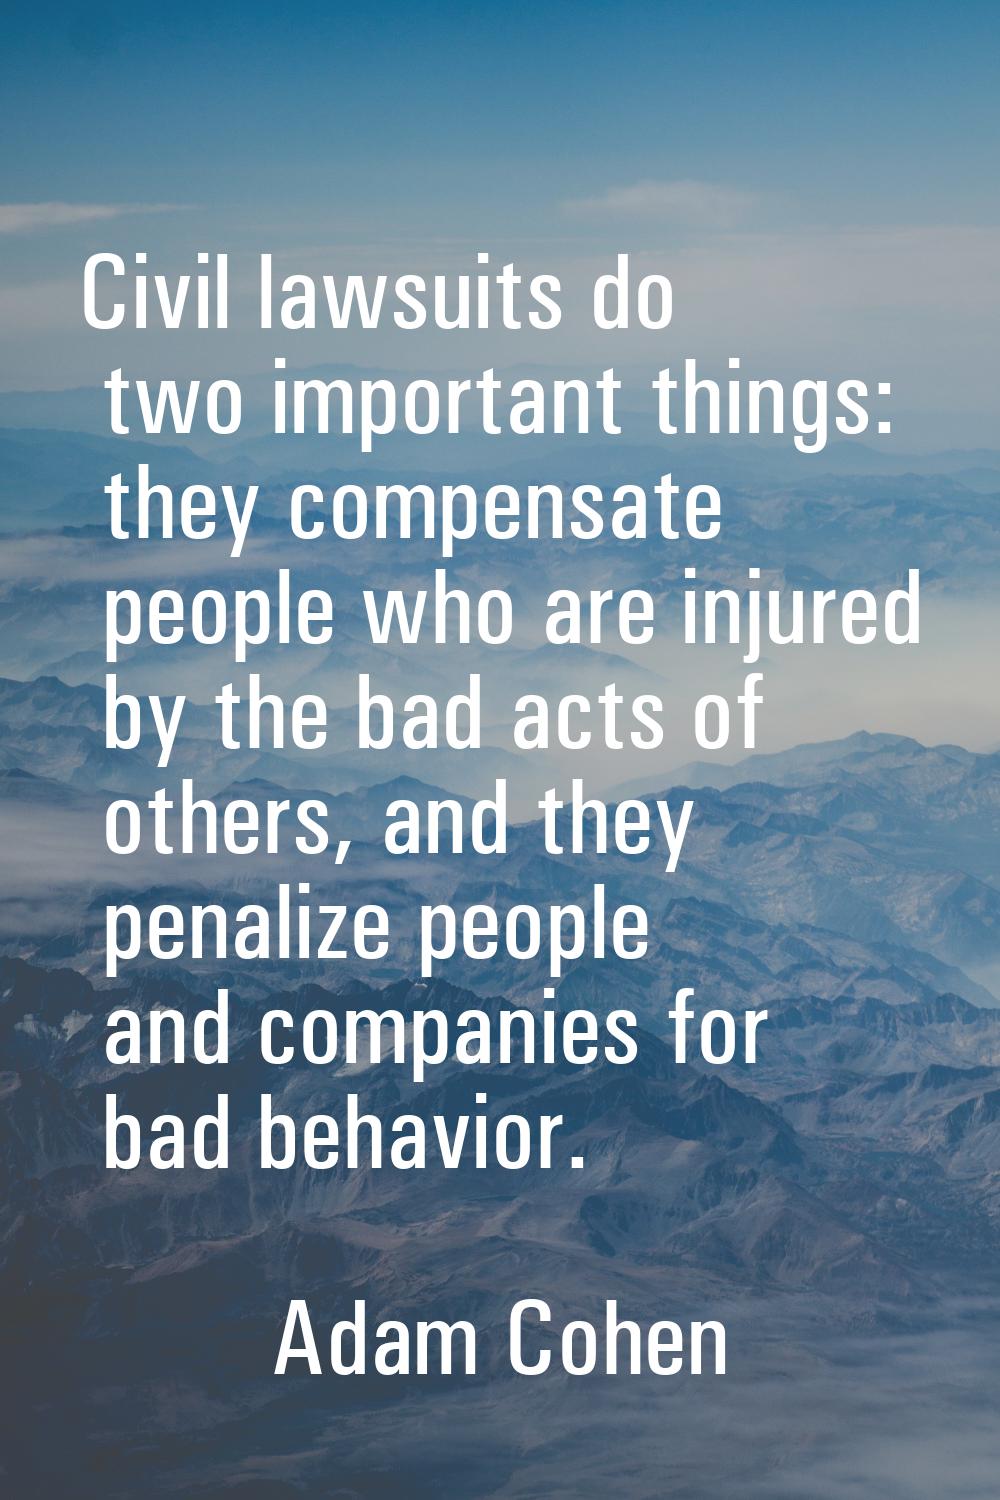 Civil lawsuits do two important things: they compensate people who are injured by the bad acts of o